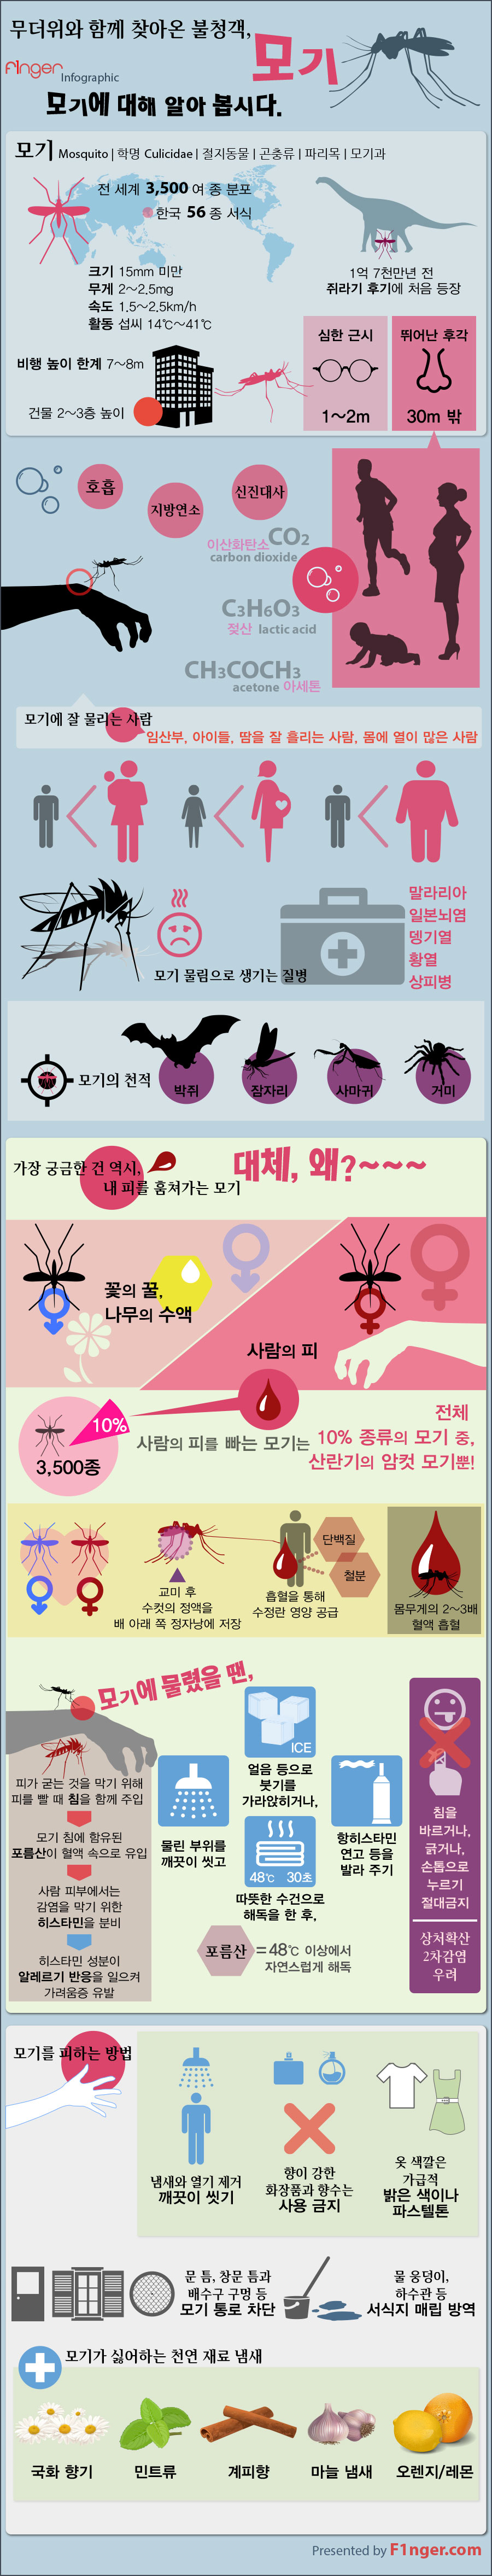 mosquito-infographic-by-F1nger